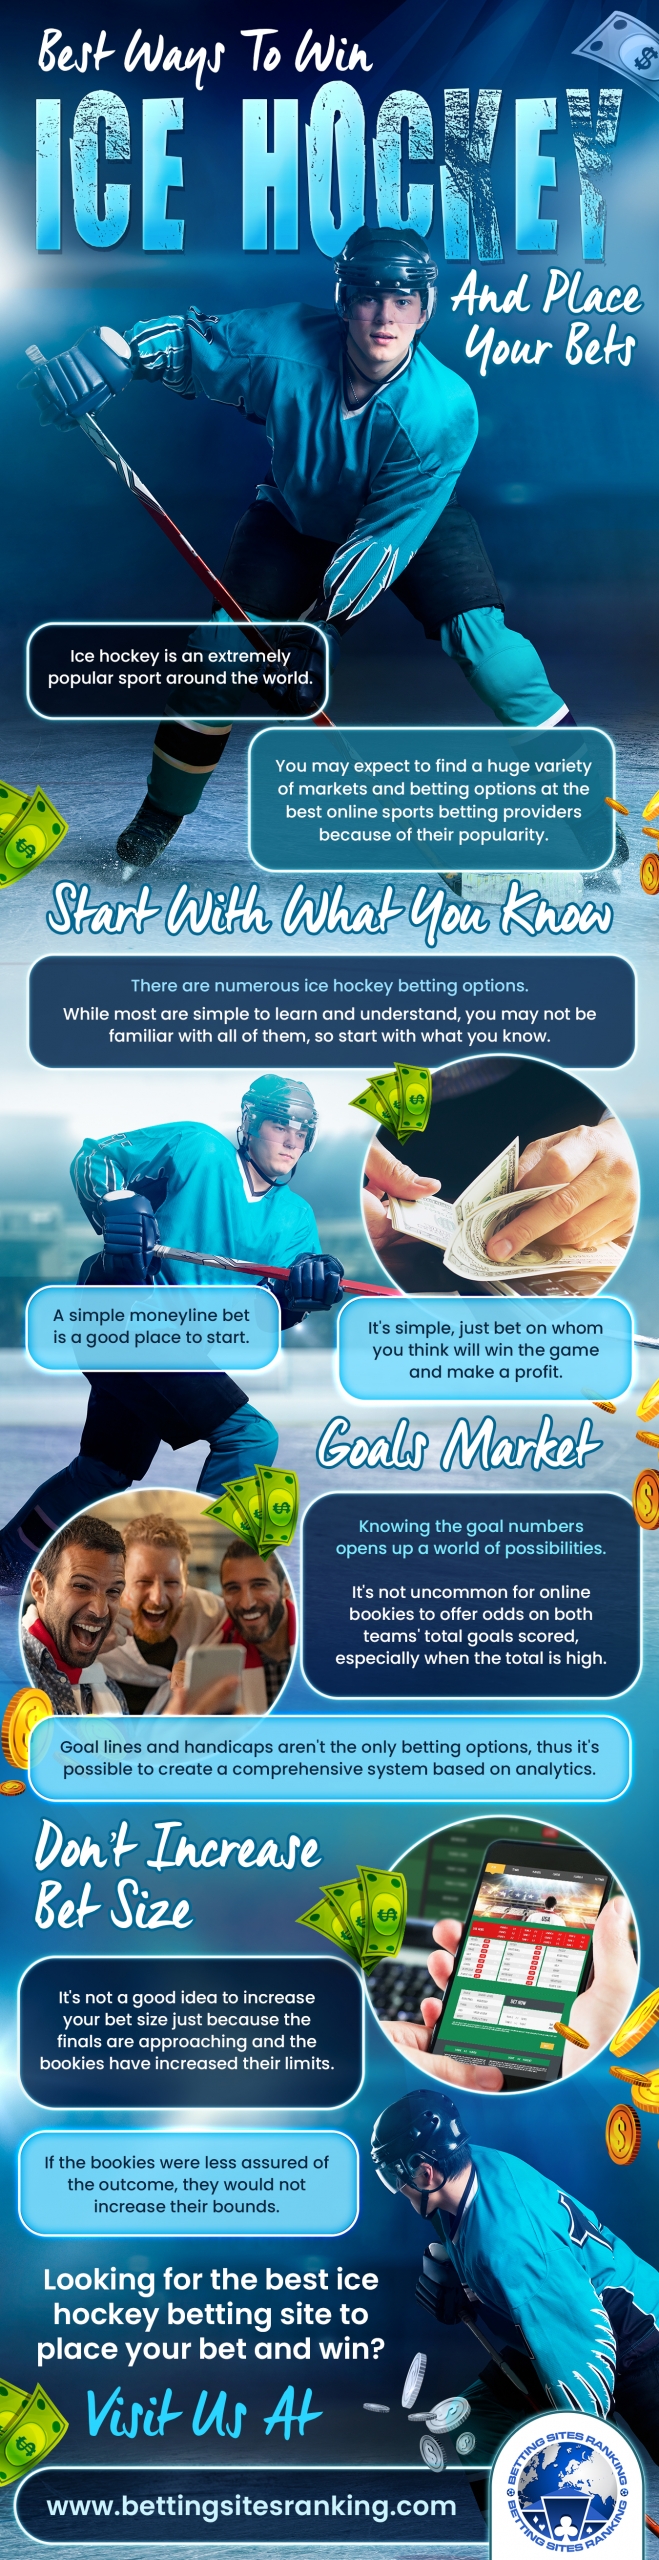 Best-Ways-to-Win-Ice-Hockey-Betting-and-Place-Your-Bets